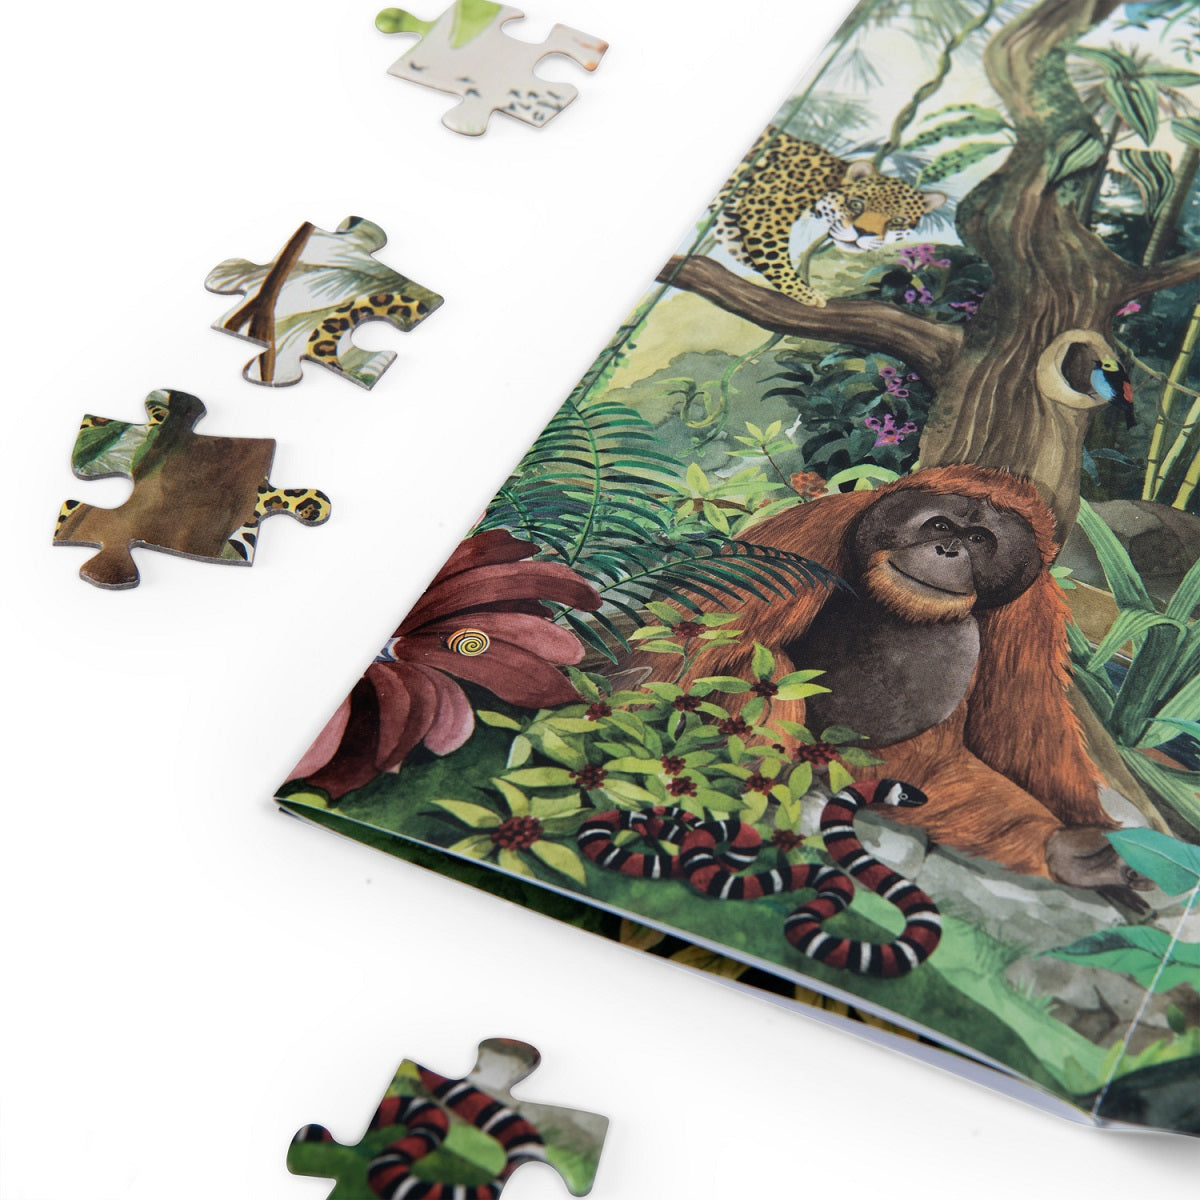 Animals of the World Puzzle 300 pc Puzzle